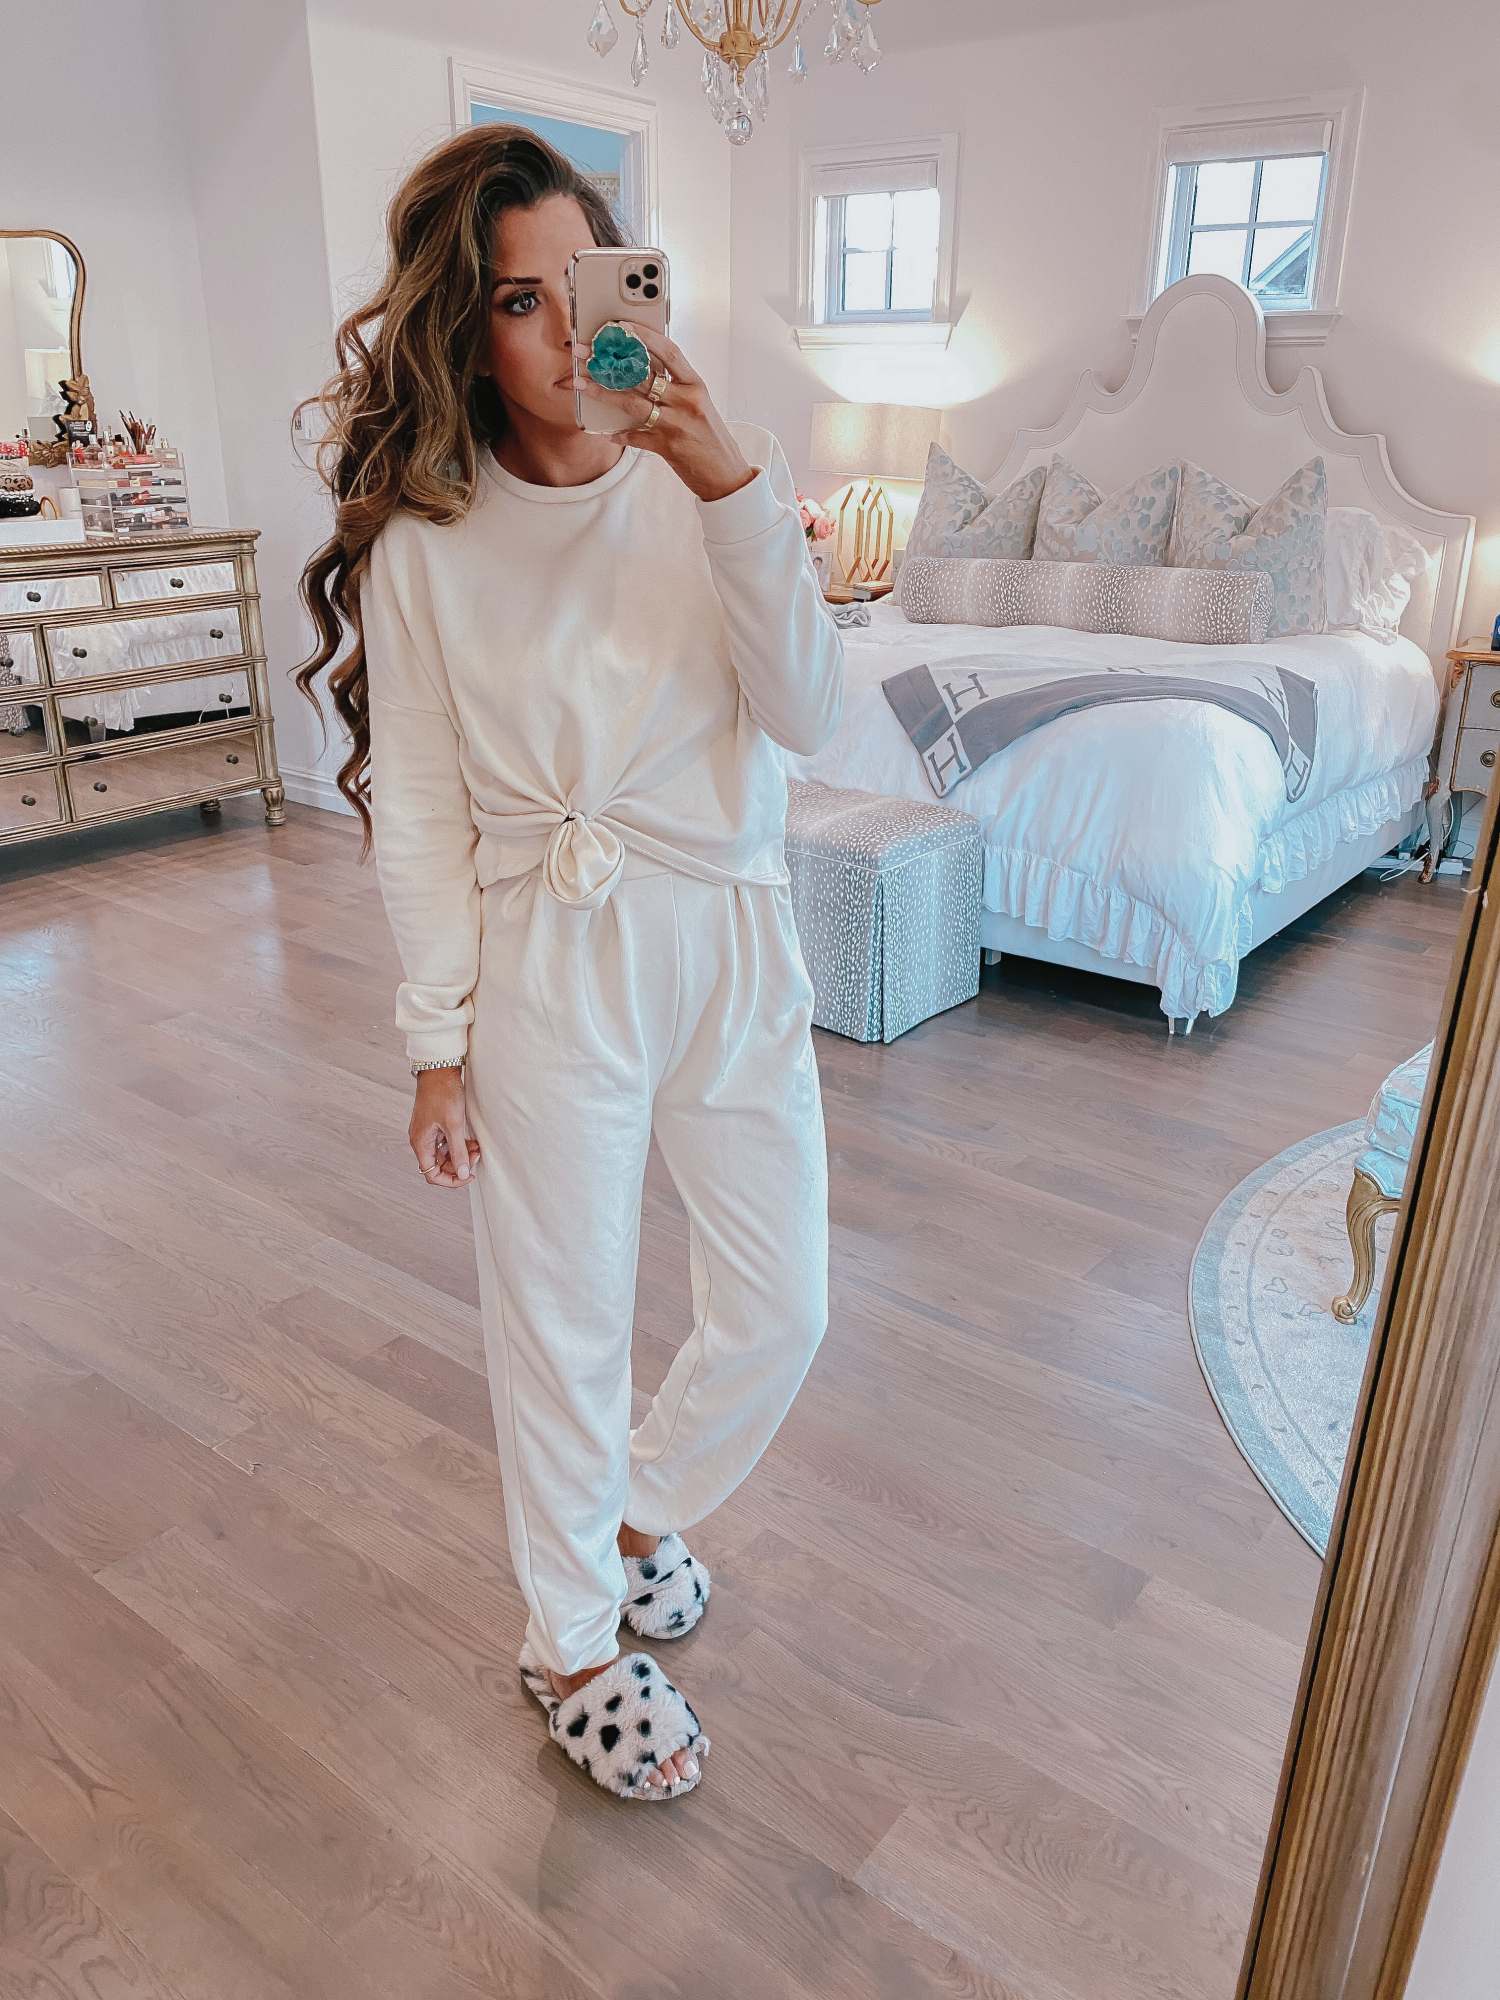 nasty gal loungewear review, cute loungwear outfits spring 2020, pinterest loungewear | Comfortable Loungewear by popular US fashion blog, The Sweetest Thing: image of Emily Gemma wearing a Z Supply The Pale Blush Rugby Stripe Weekender Sweater and Nordstrom Zella leggings.Comfortable Loungewear by popular US fashion blog, The Sweetest Thing: image of Emily Gemma wearing a Free People Culver City Set.